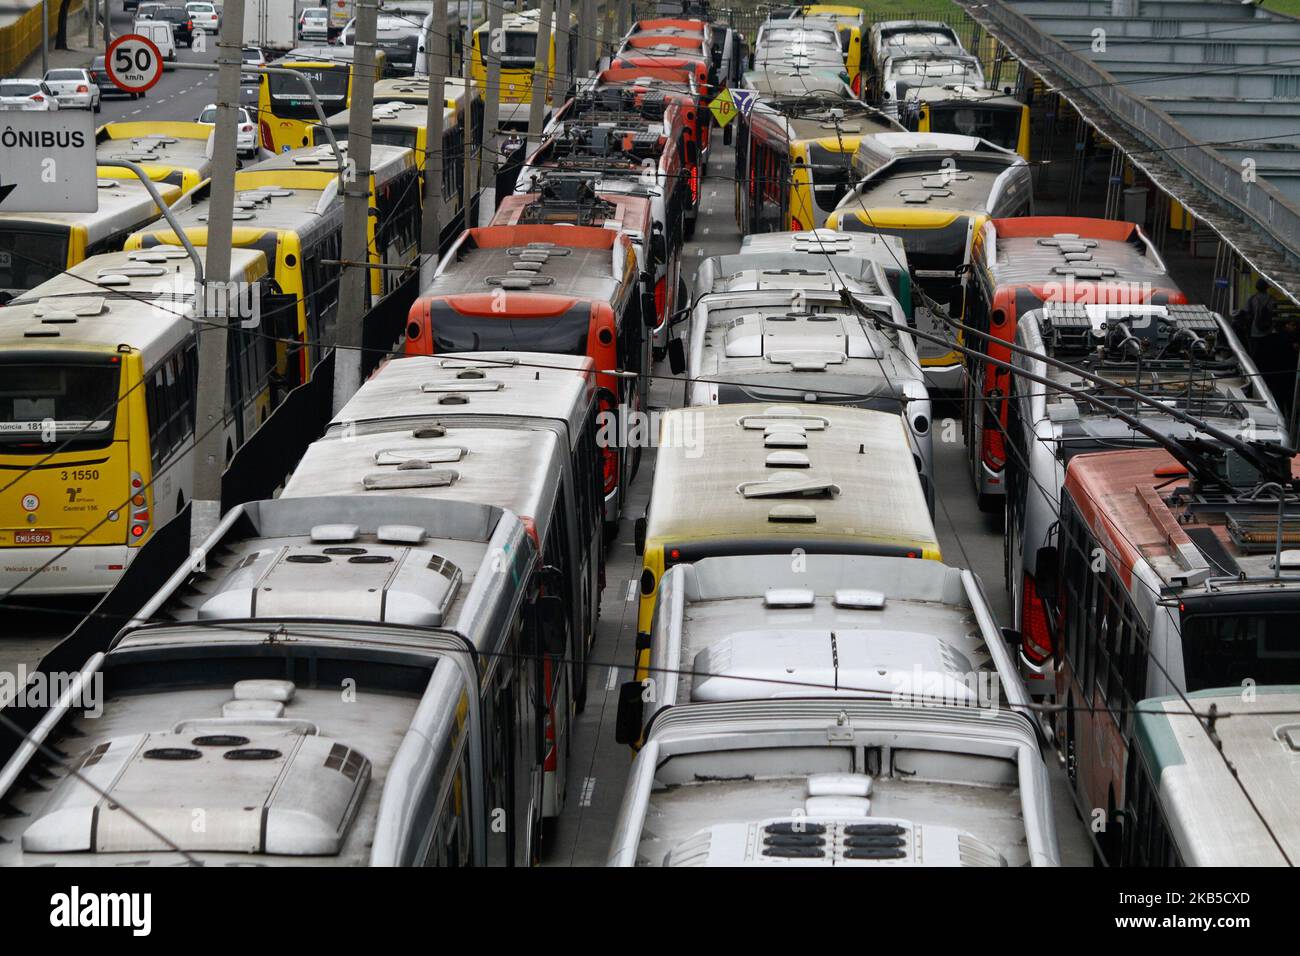 Bus drivers and bus collectors - Bus drivers and collectors strike in the city of Sao Paulo on Friday 6th September 2019. The court ruled that 70% of the fleet circulate to serve the population at peak times. The Sao Paulo Urban Road Transport Drivers and Workers Union has called a general strike of the category today in protest against the reduction of the fleet by Mayor Bruno Covas' management and the maintenance of jobs. According to the union, the city has already removed 450 vehicles from circulation and by the end of the year, another thousand would be removed from the streets. (Photo by Stock Photo